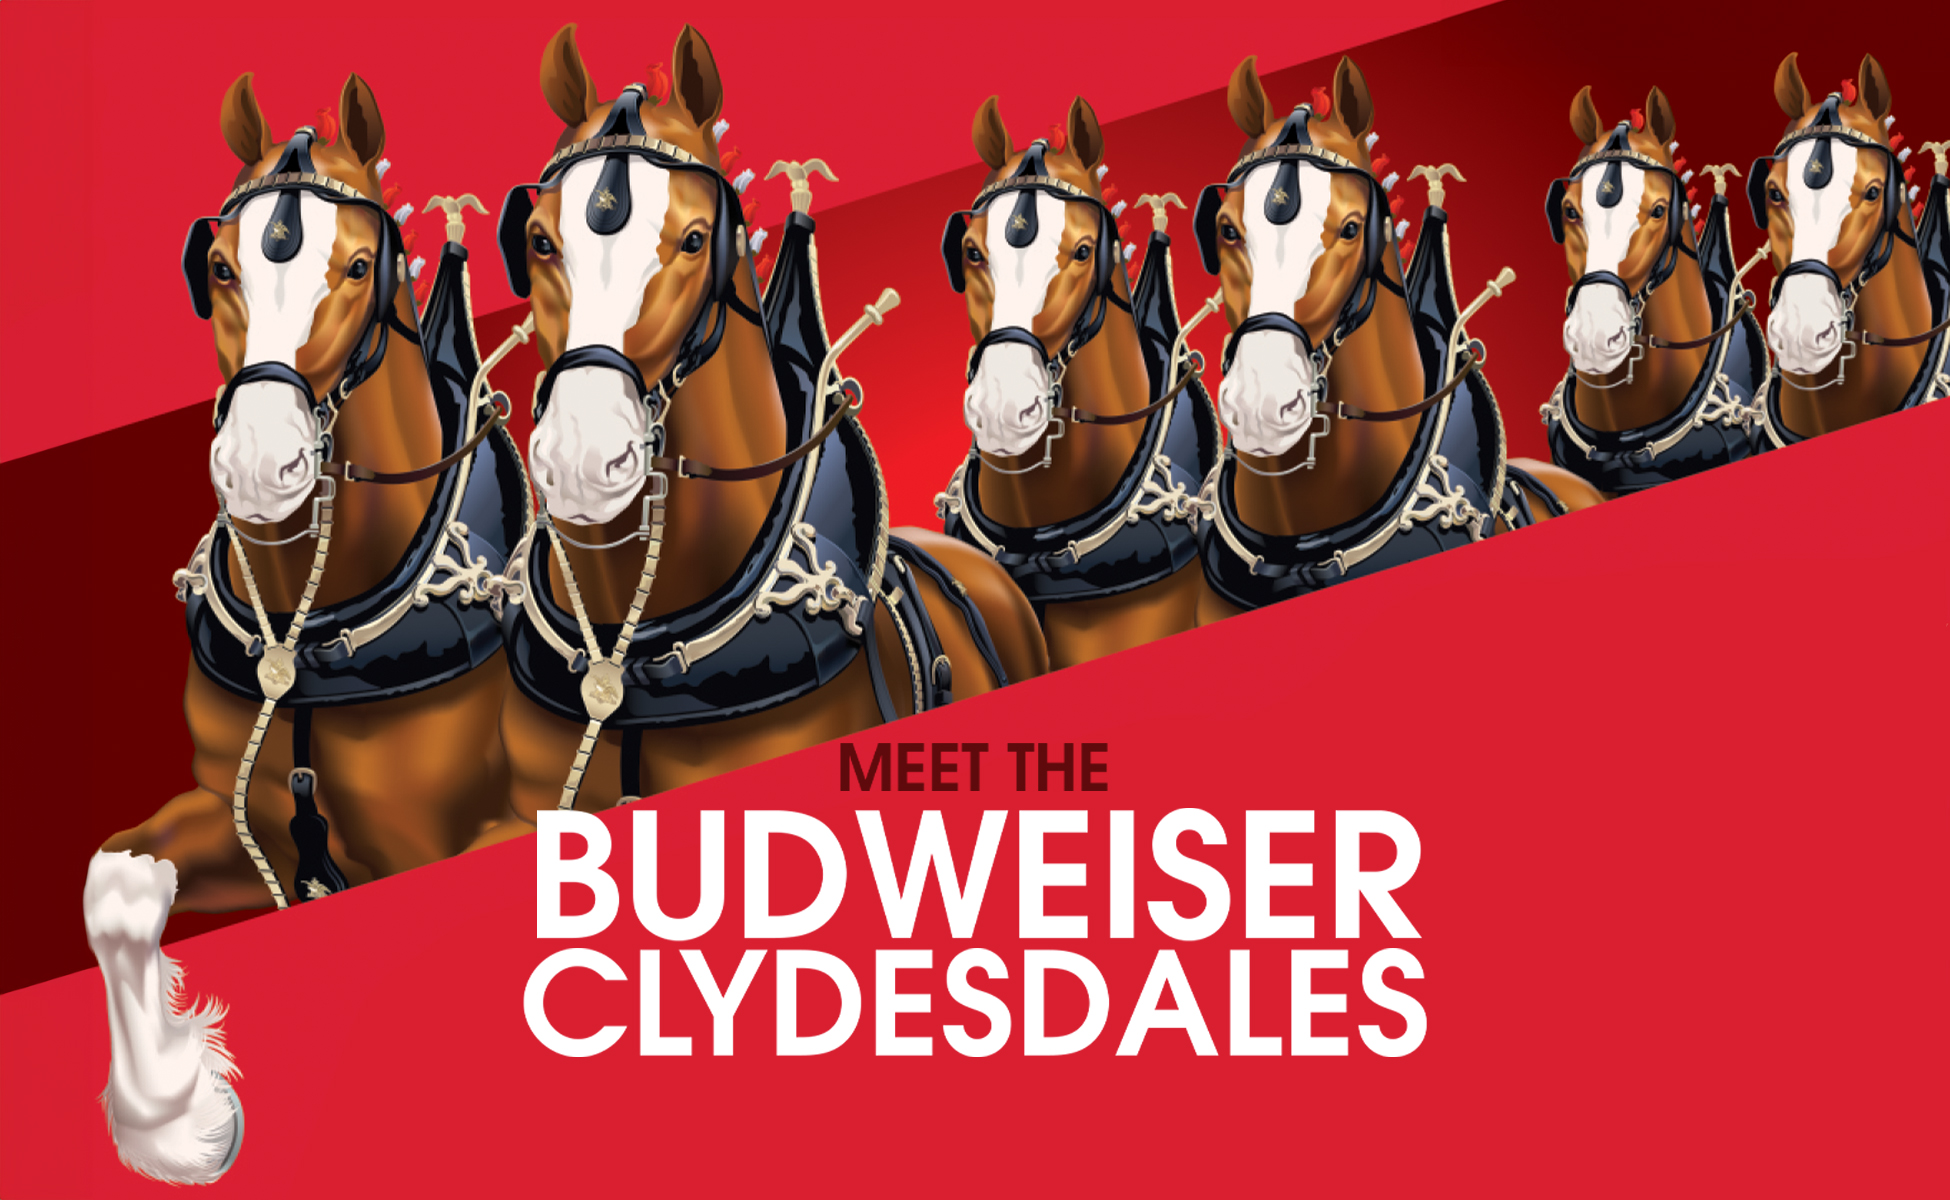 FREE! Meet the Budweiser Clydesdales